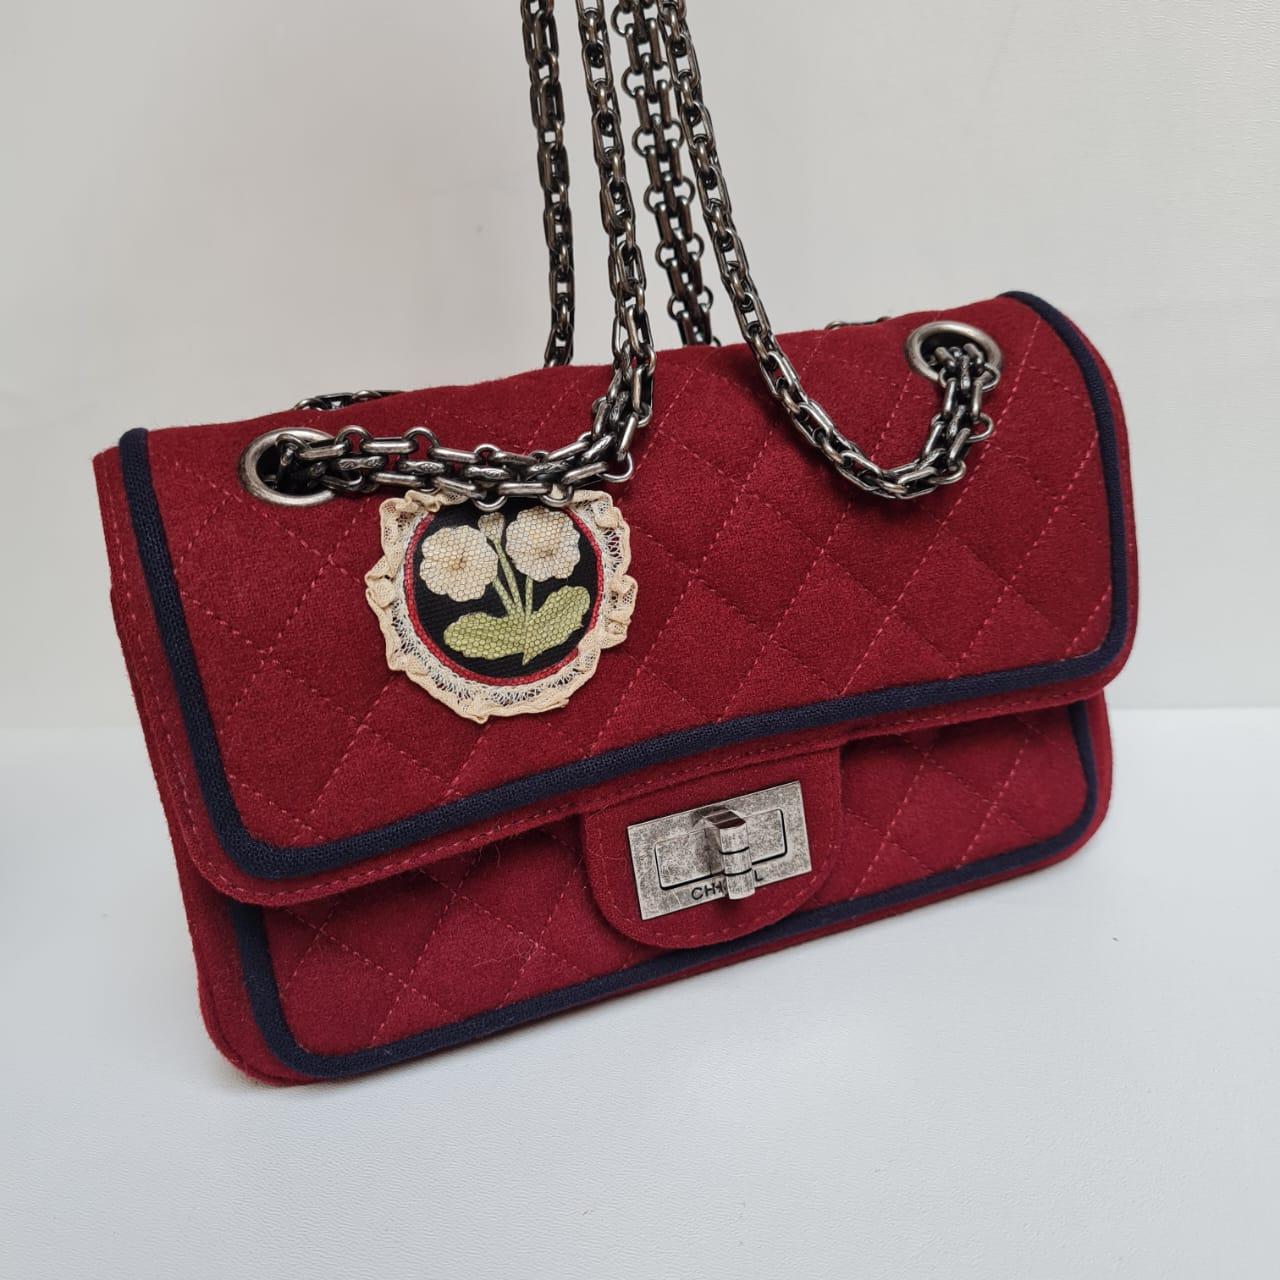 Chanel 2015 Red Edelweiss Reissue Wool Flap Bag For Sale 11